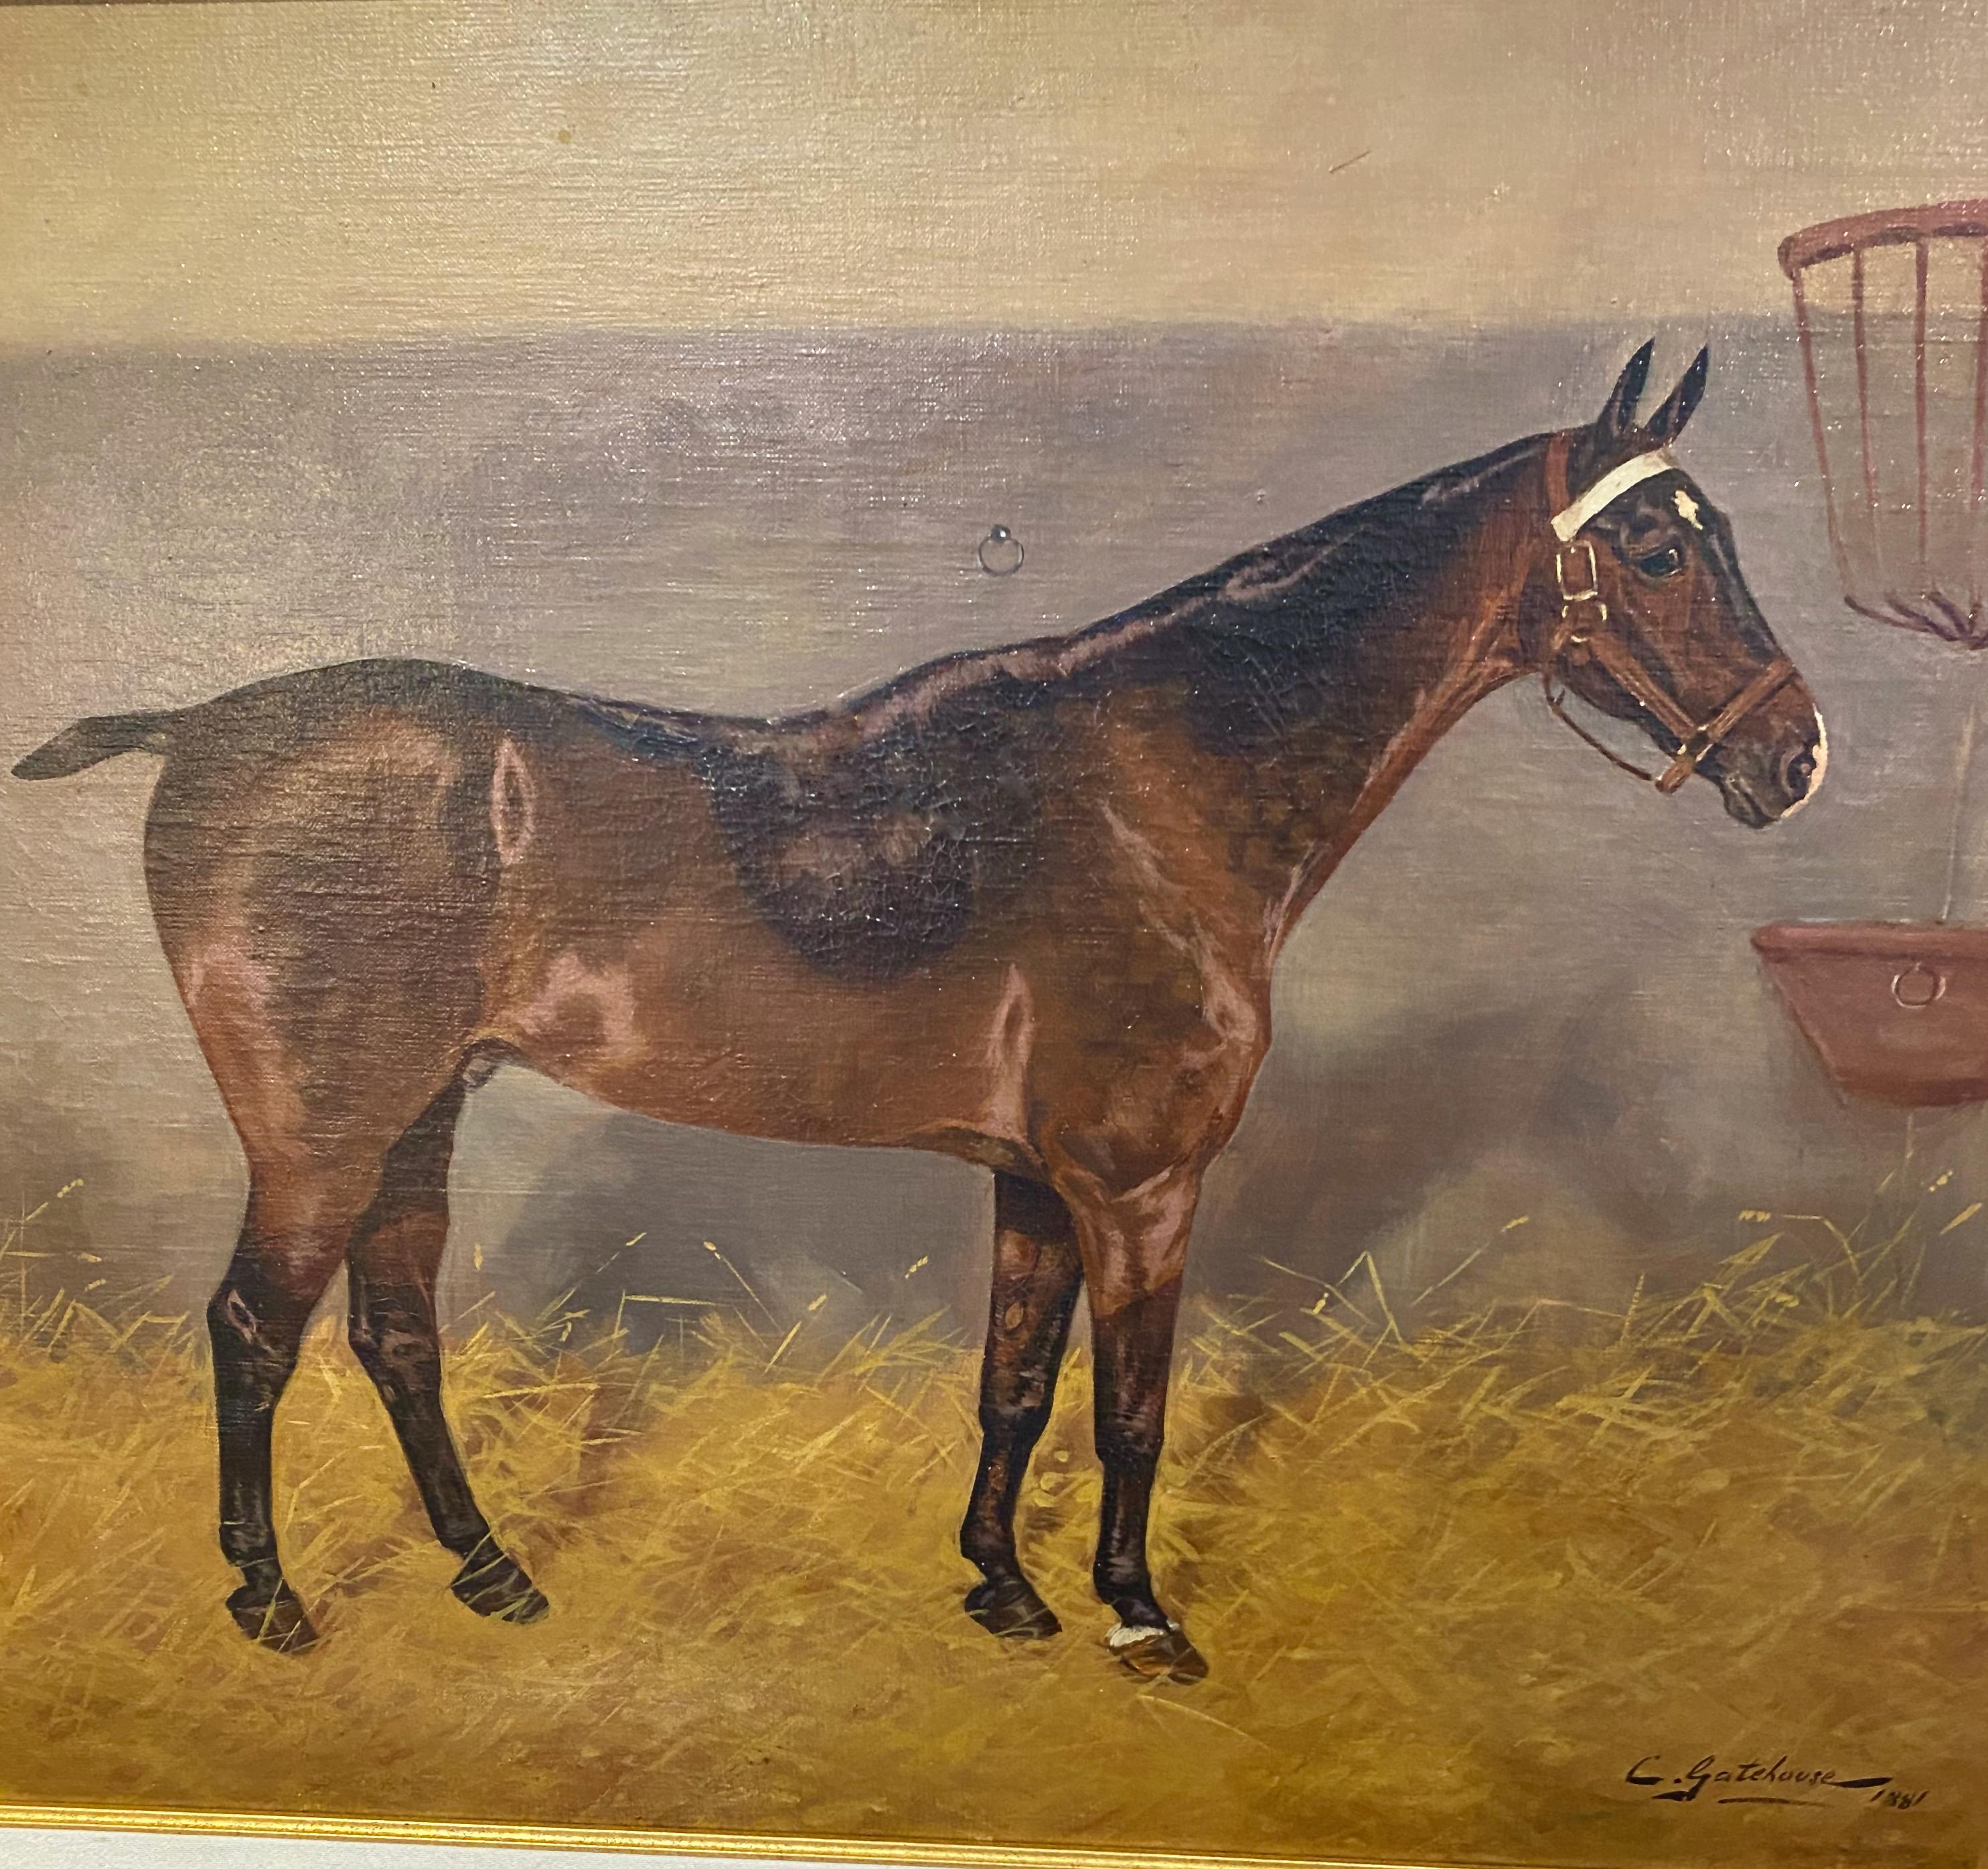 This is a signed and dated painting of a race horse by the well-listed English artist, Charles E. Gatehouse (1866-1952). Gatehouse was known for his excellent depictions of horses and dogs, as well as other animals and landscapes. The painting has